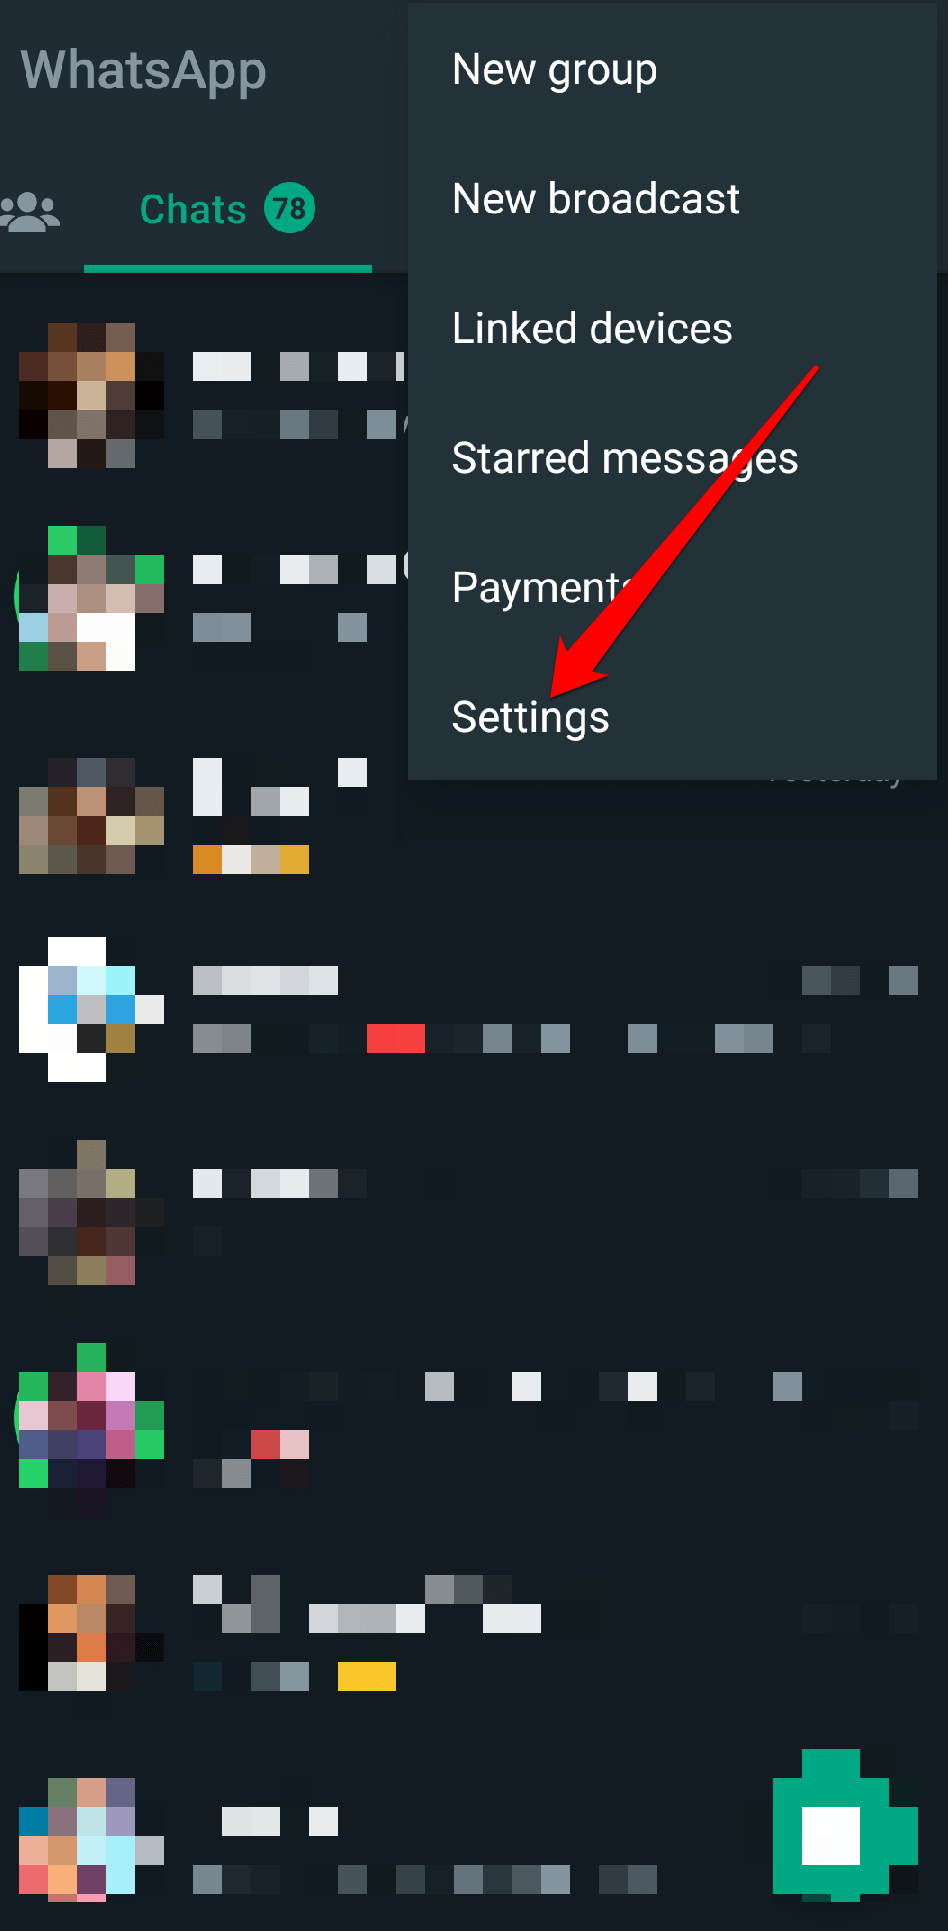 Tap on "Settings" from the drop-down menu.